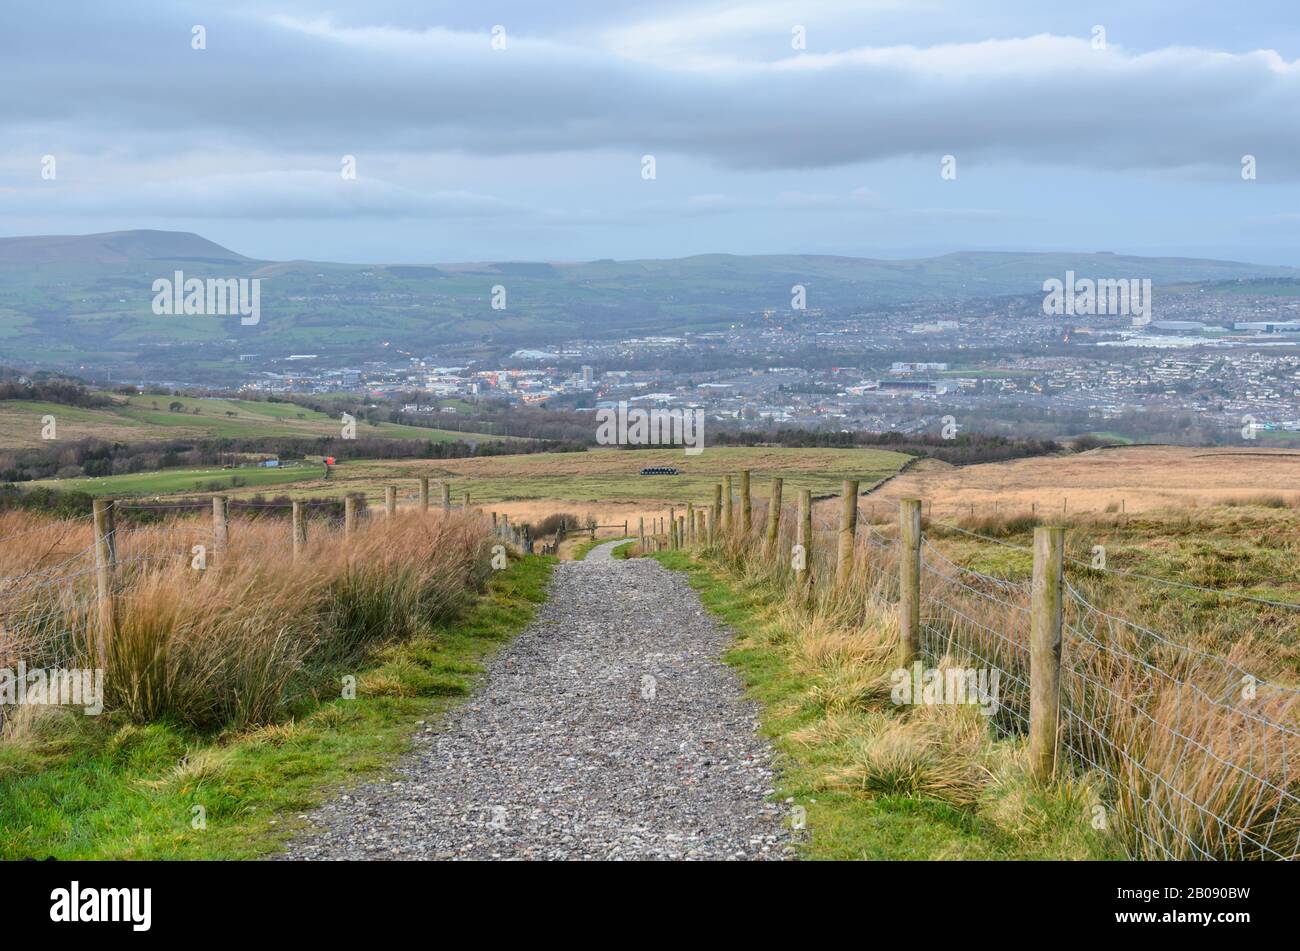 The view over Burnley in Lancashire, England from Crown Point Stock Photo